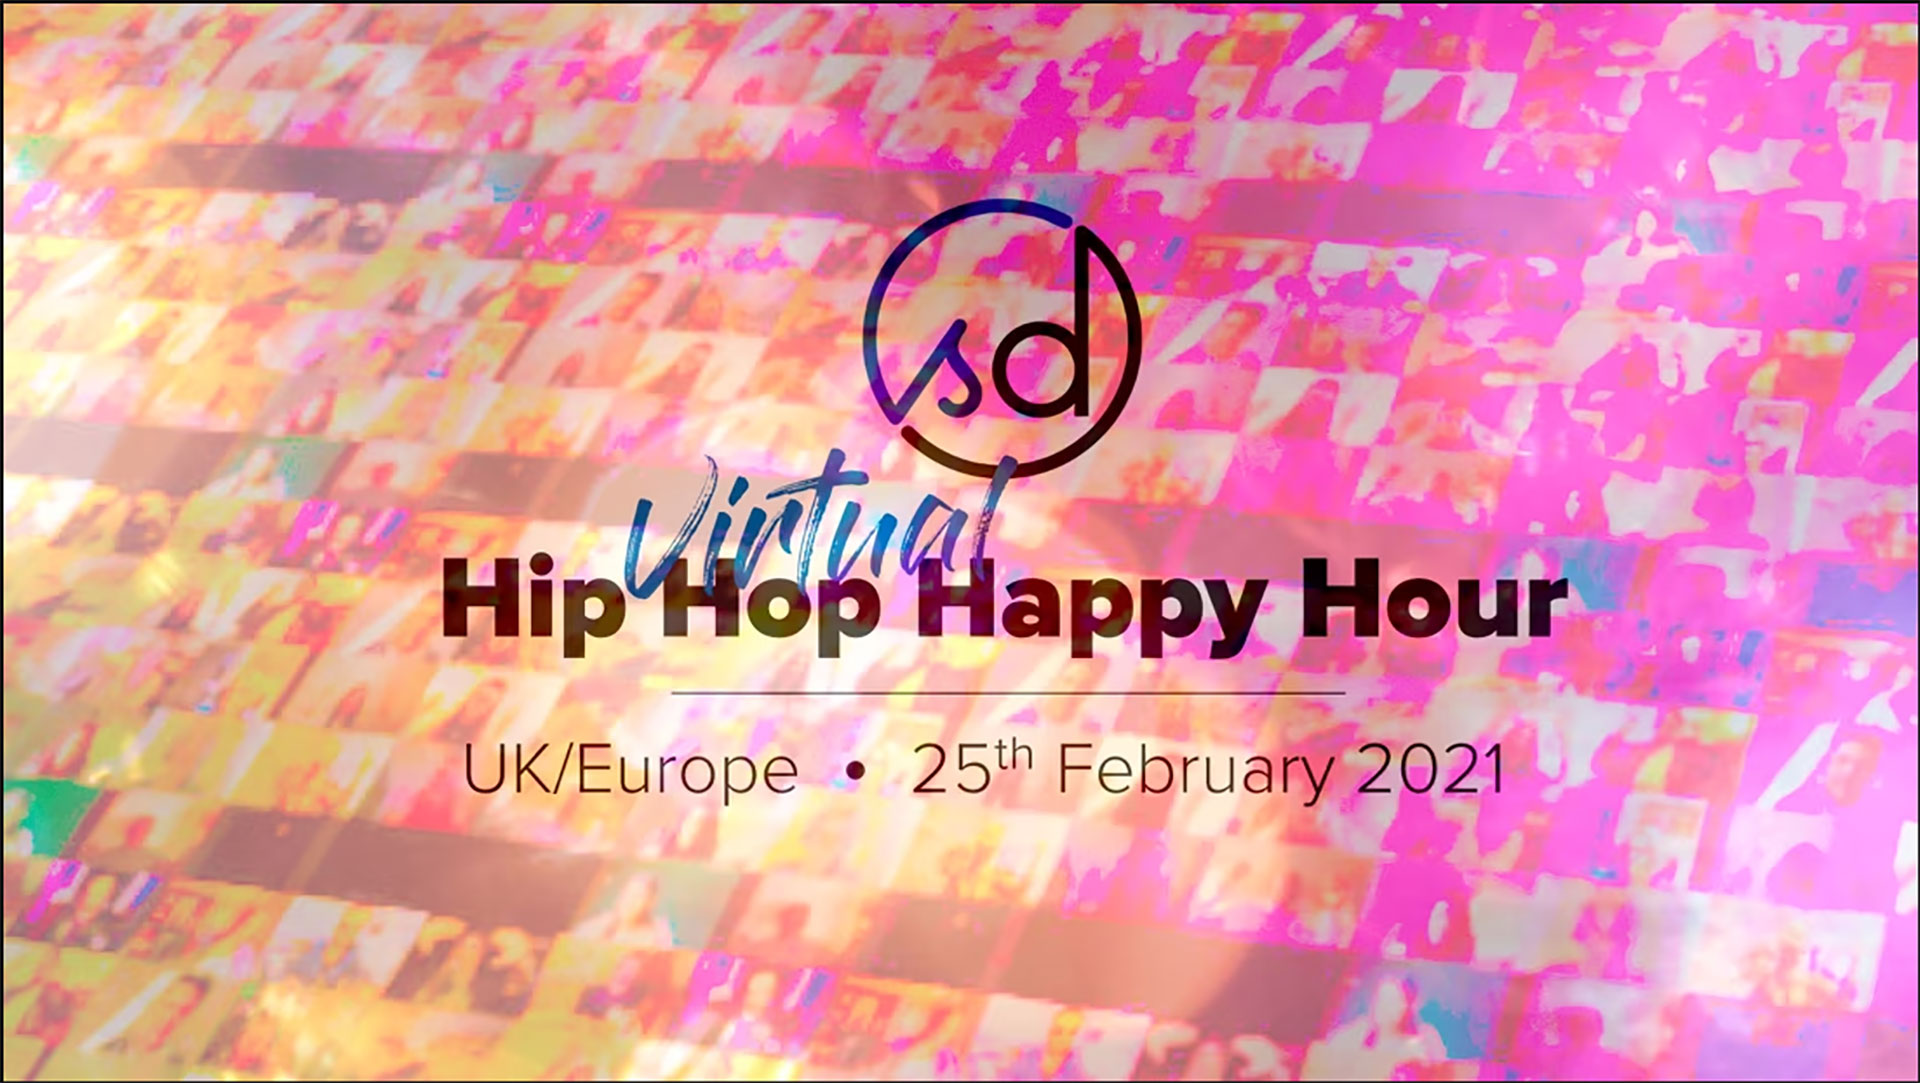 UK/Europe: Virtual Hip-Hop Happy Hour with SongDivision